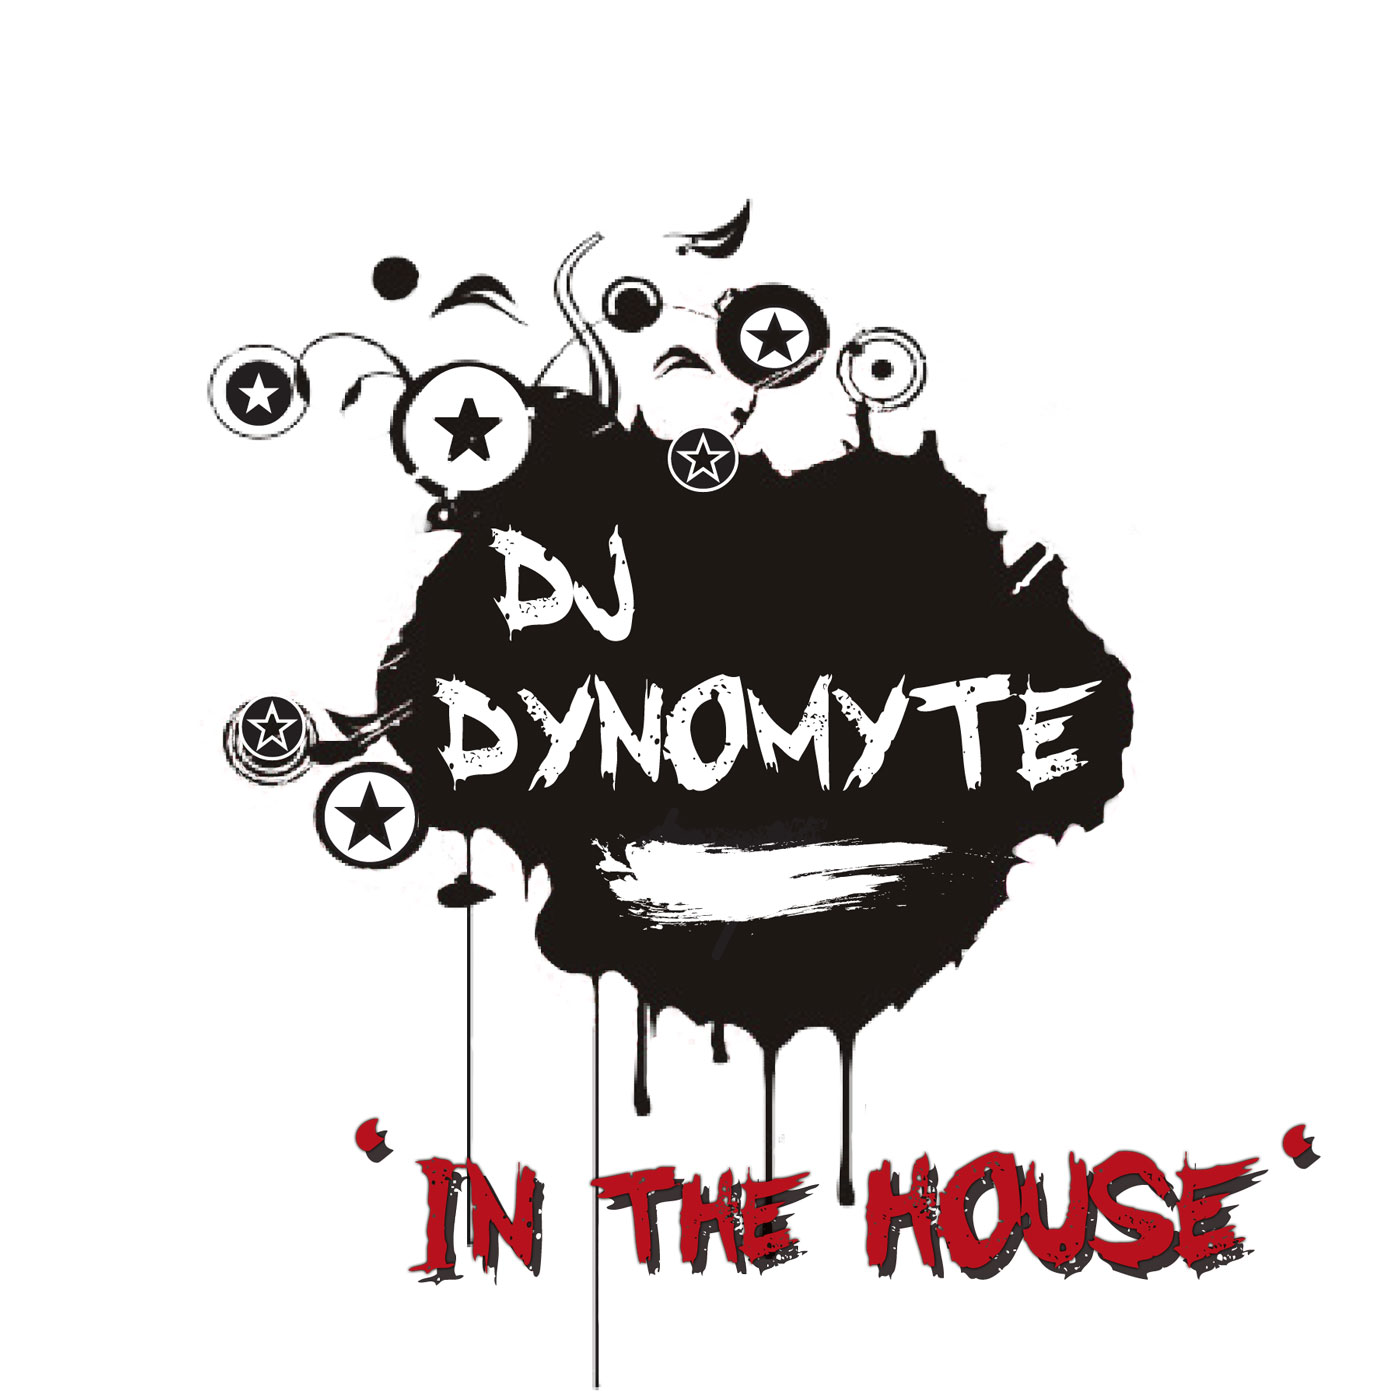 DJ Dynomyte presents In The House podcast